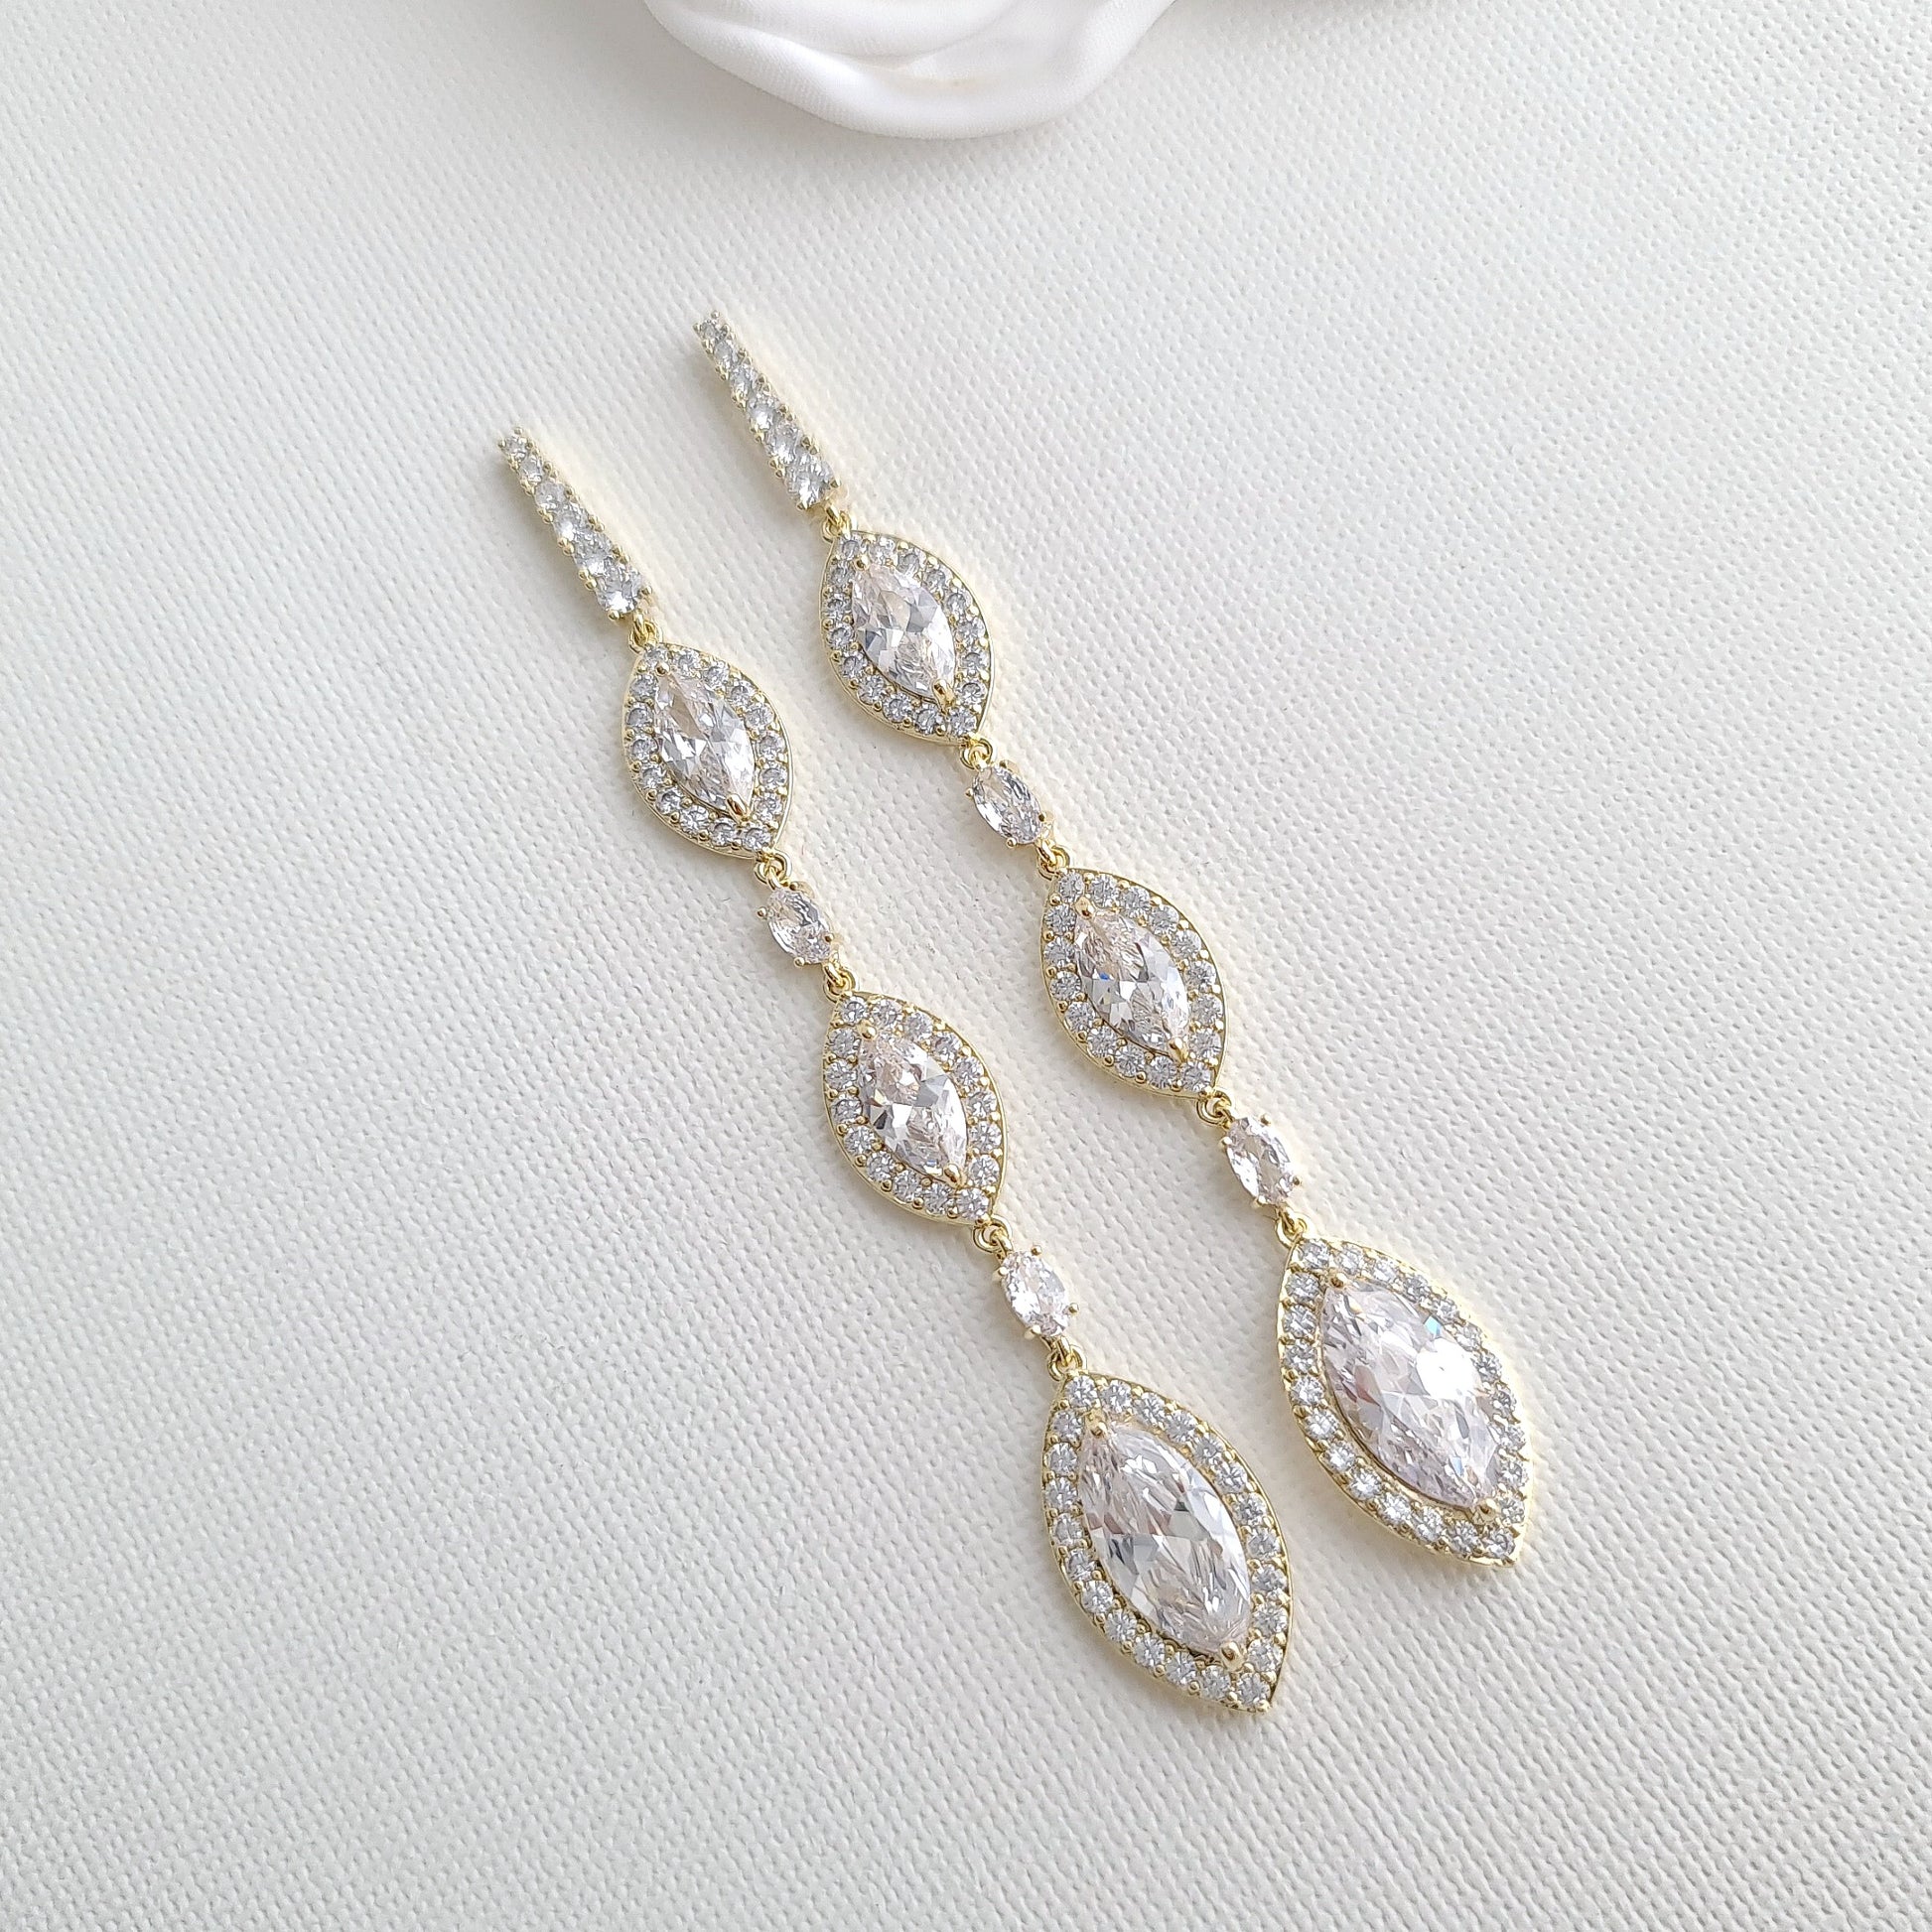 Gold & Cubic Zirconia Extra Long Earrings for Brides, Women for Wedding Prom-Poetry Design